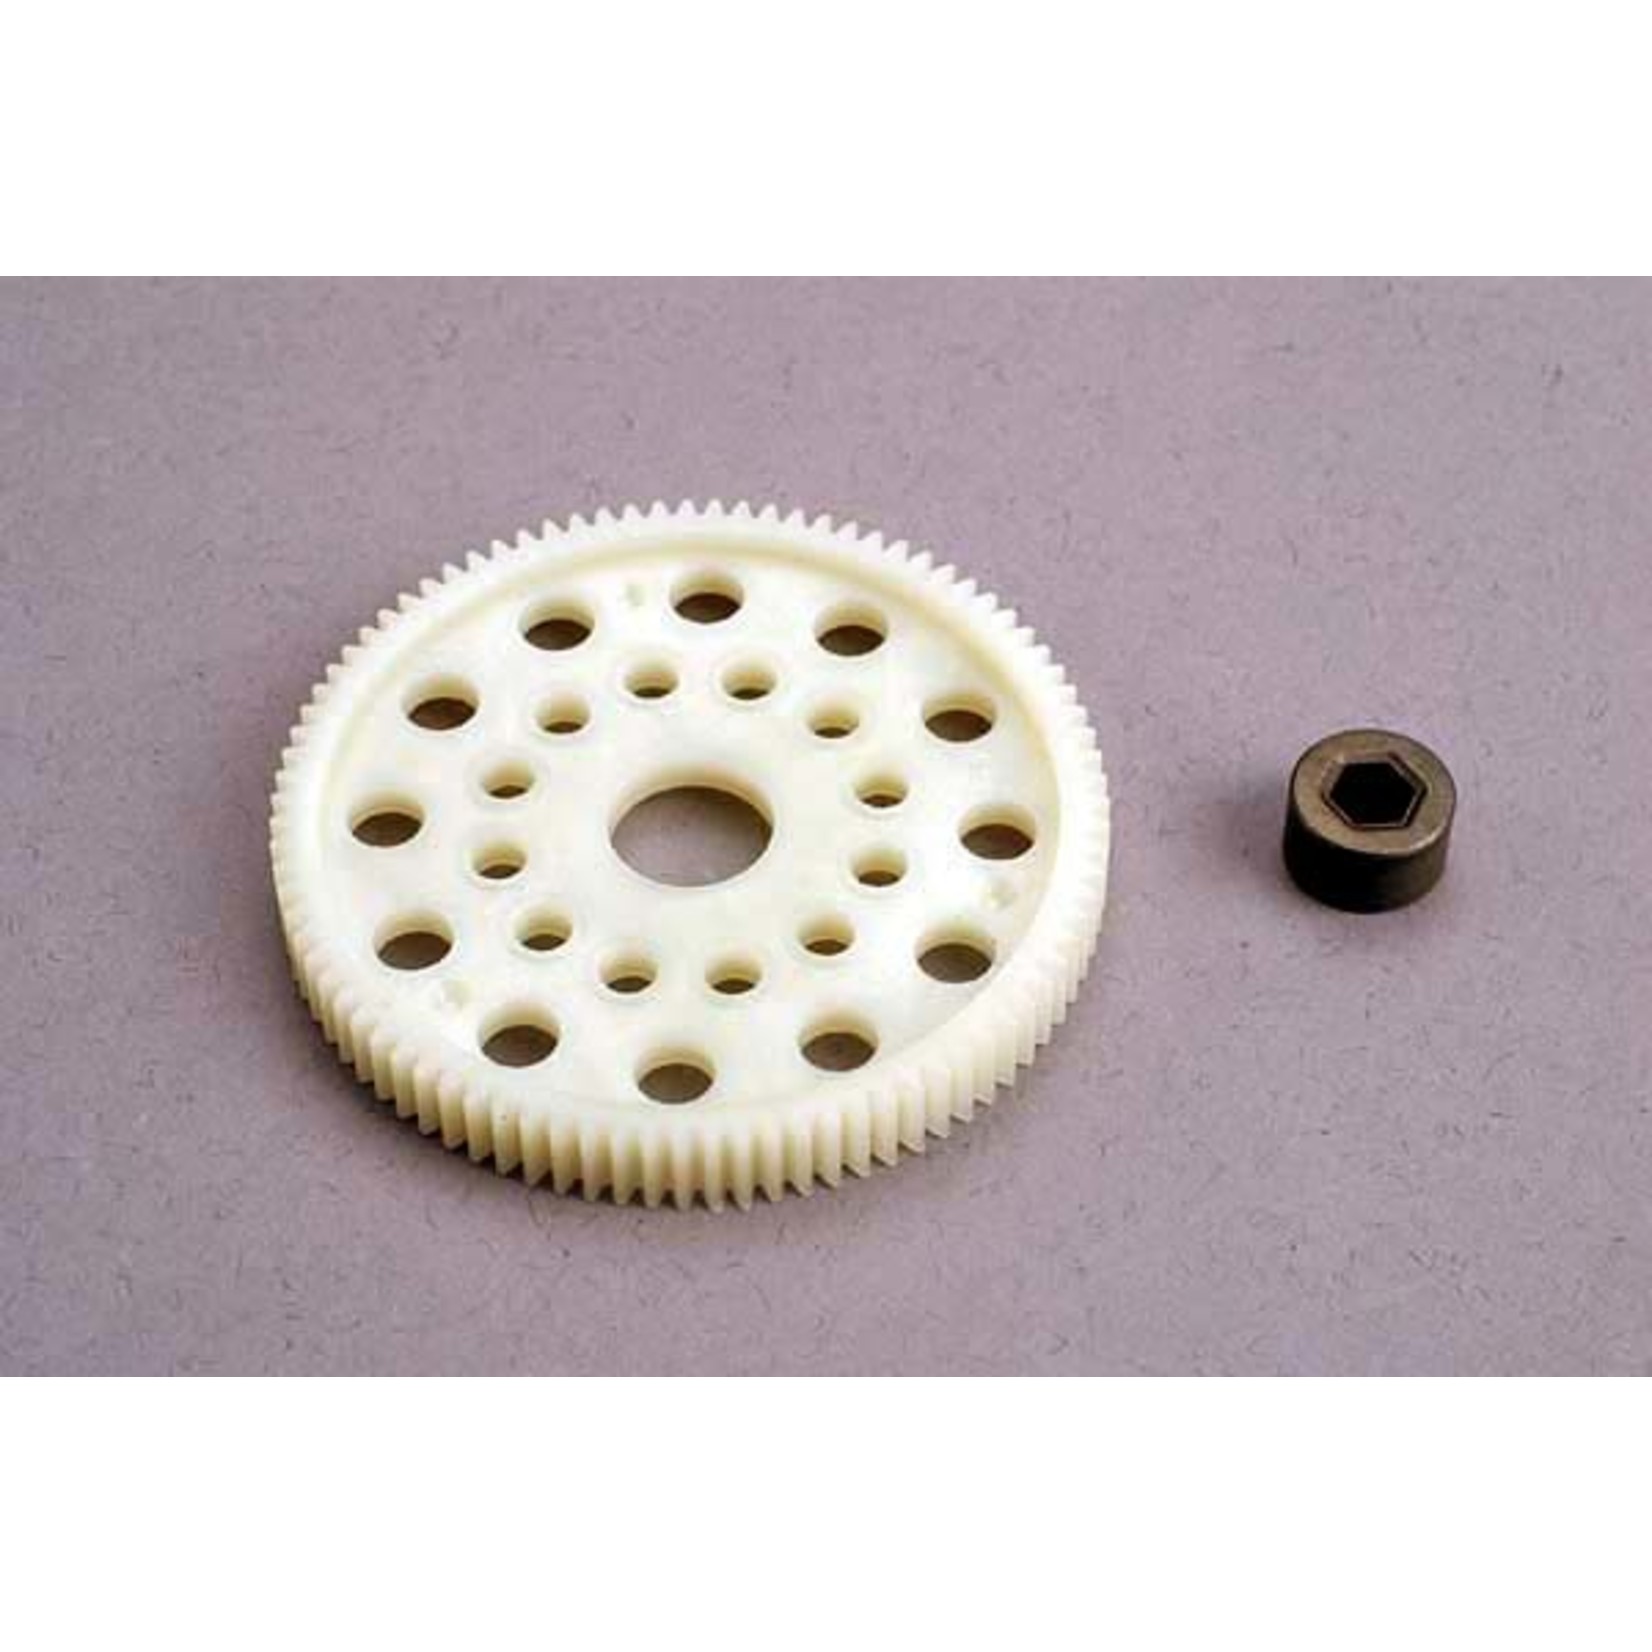 Traxxas 4687 - Spur gear (87-tooth) (48-pitch) w/bushing